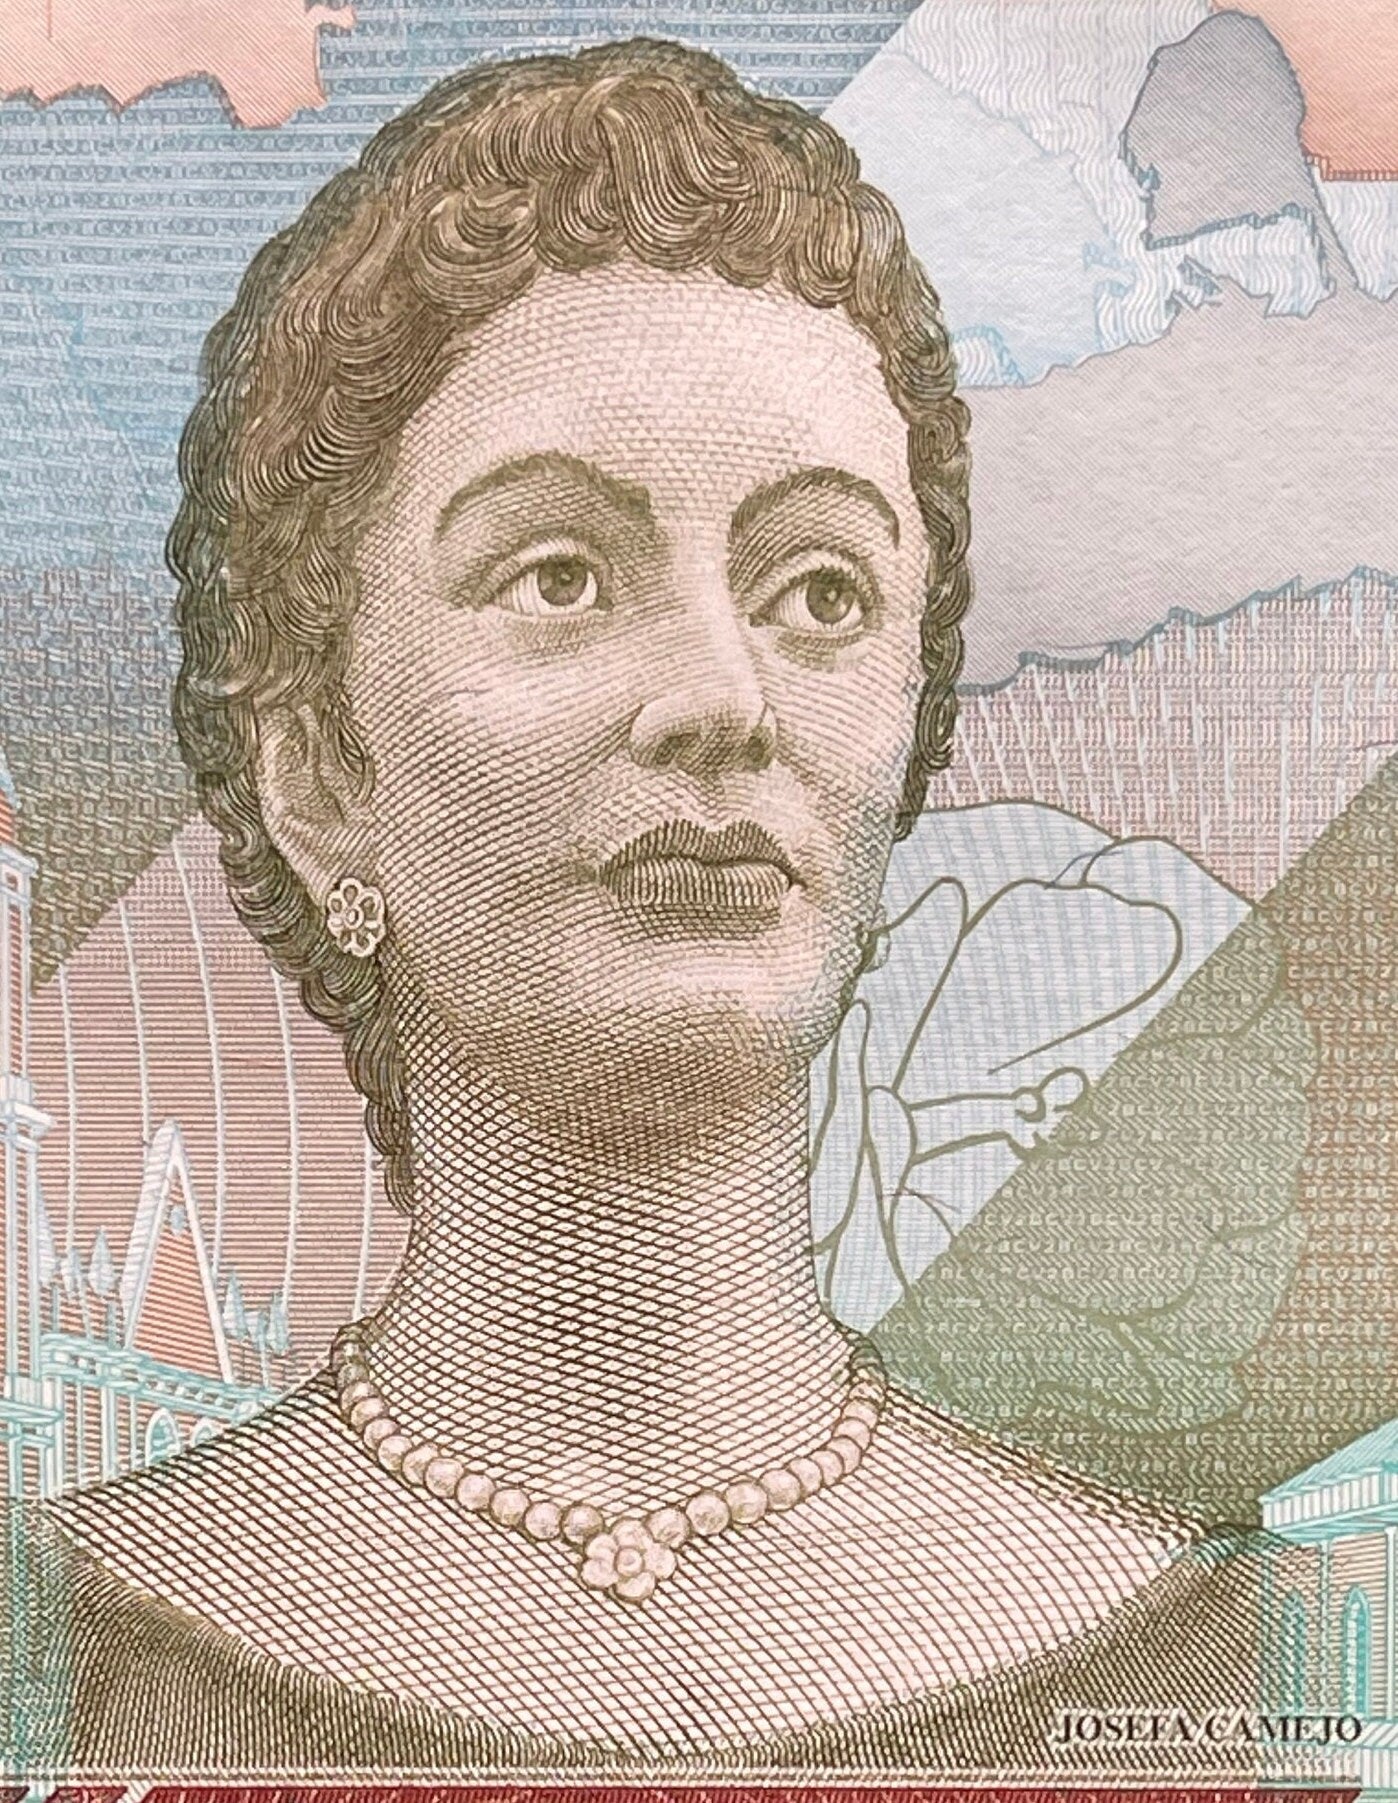 Doña Ignacia Josefa Camejo & Yellow-Crowned Parrot 2 Bolívares Venezuela Authentic Banknote Money for Collage (Revolutionary) (Lady Ardent)